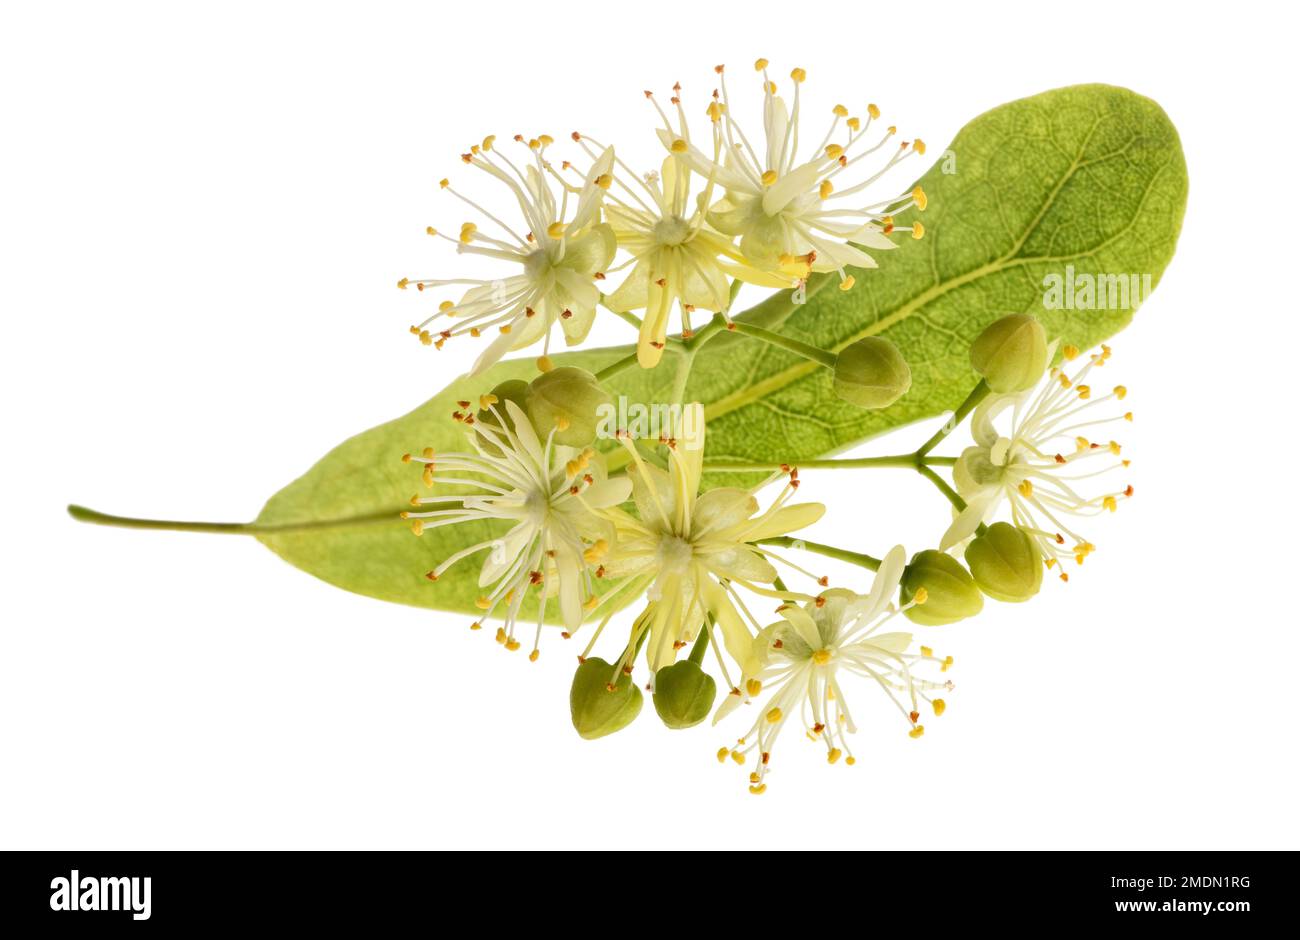 Linden  bract and flowers isolated on white background Stock Photo